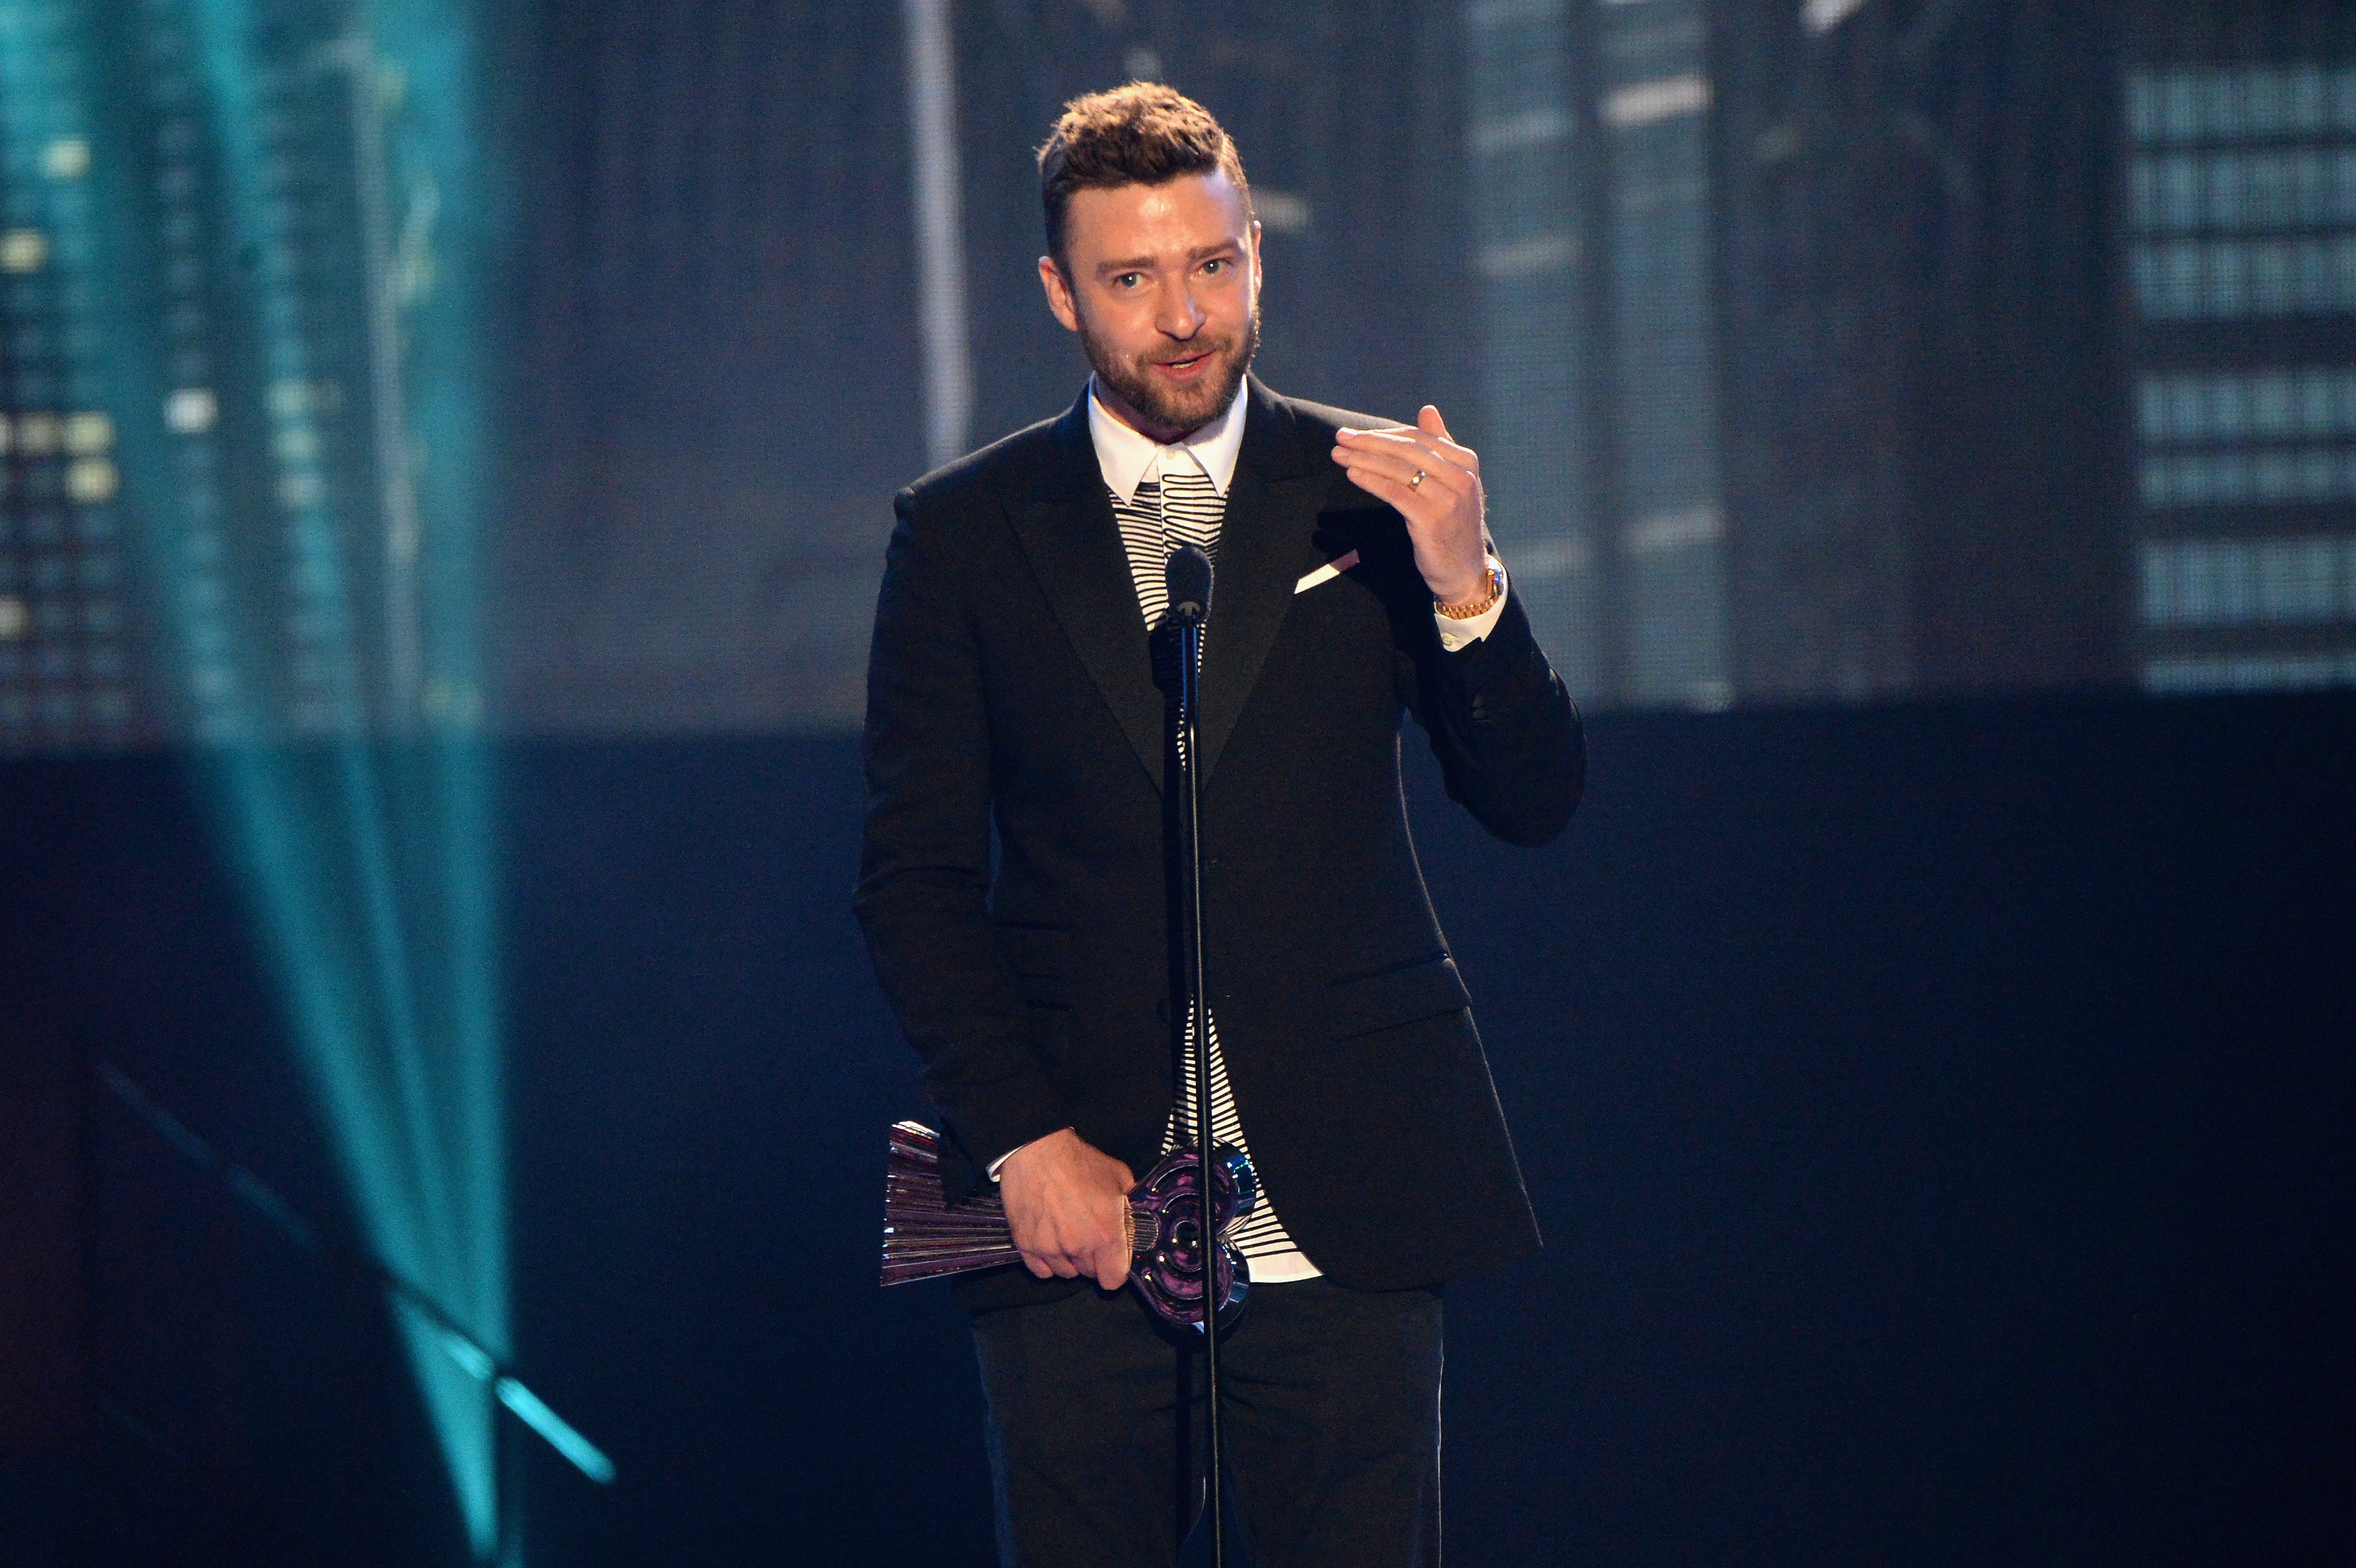 Singer Justin Timberlake performs onstage at the iHeartRadio Music Awards which broadcasted live on TBS, TNT, AND TRUTV from The Forum on April 3, 2016 in Inglewood, California. (Kevin Mazur&amp;mdashHeartRadio / Turner/Getty Images)